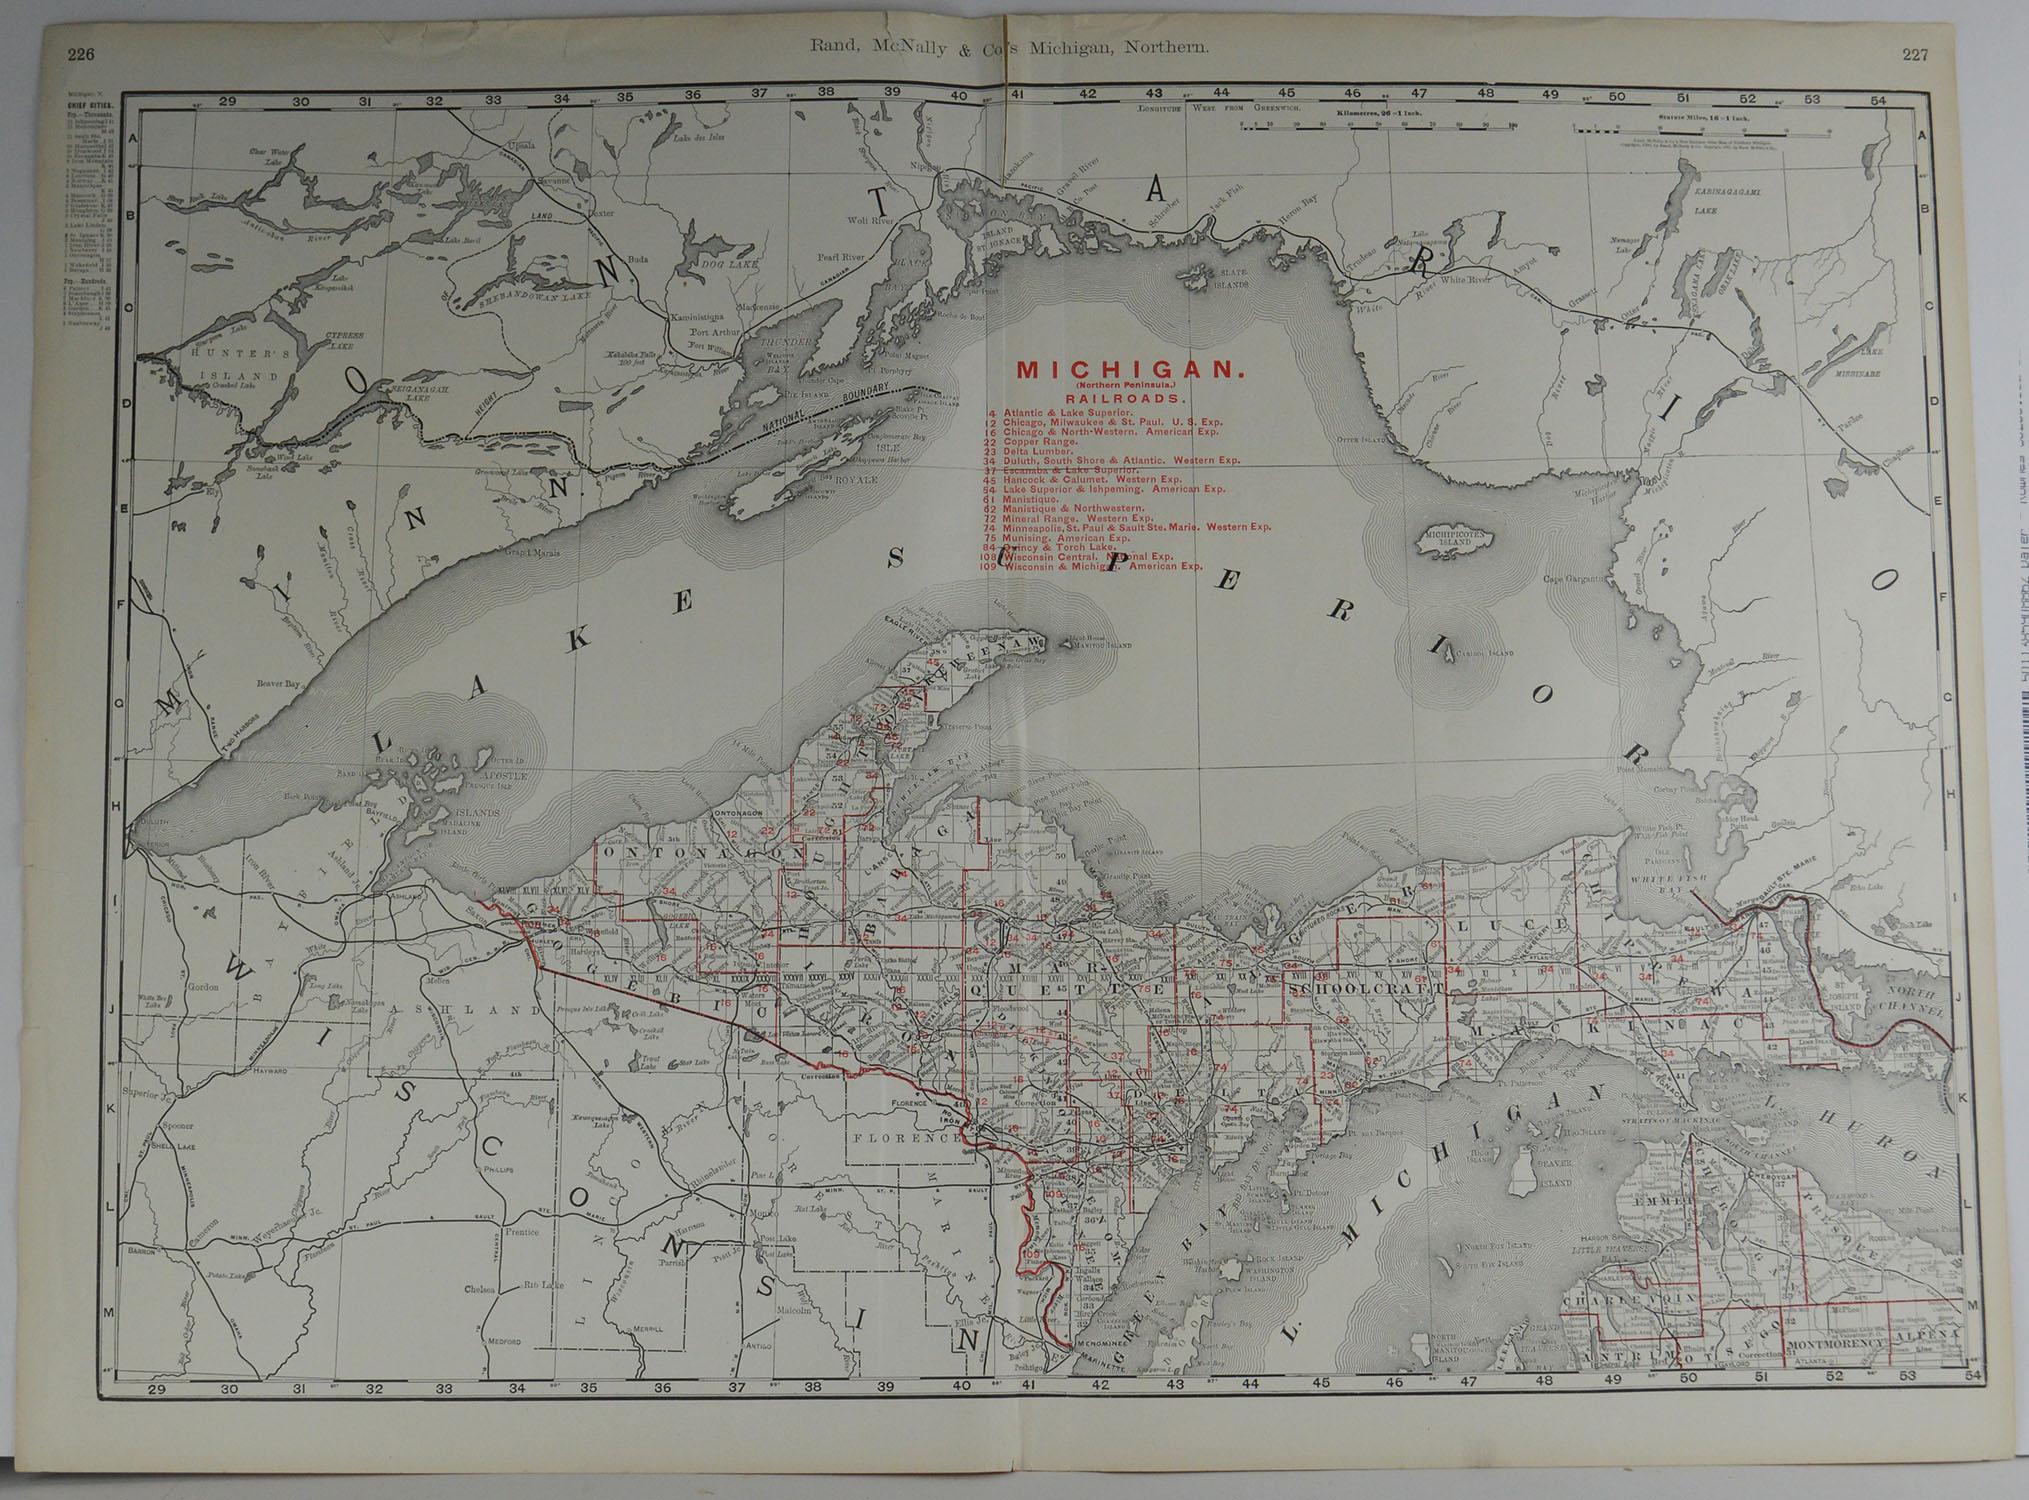 Fabulous monochrome map with red outline color 

Original color

By Rand, McNally & Co.

Published, circa 1900

Unframed

Repairs to minor edge tears.